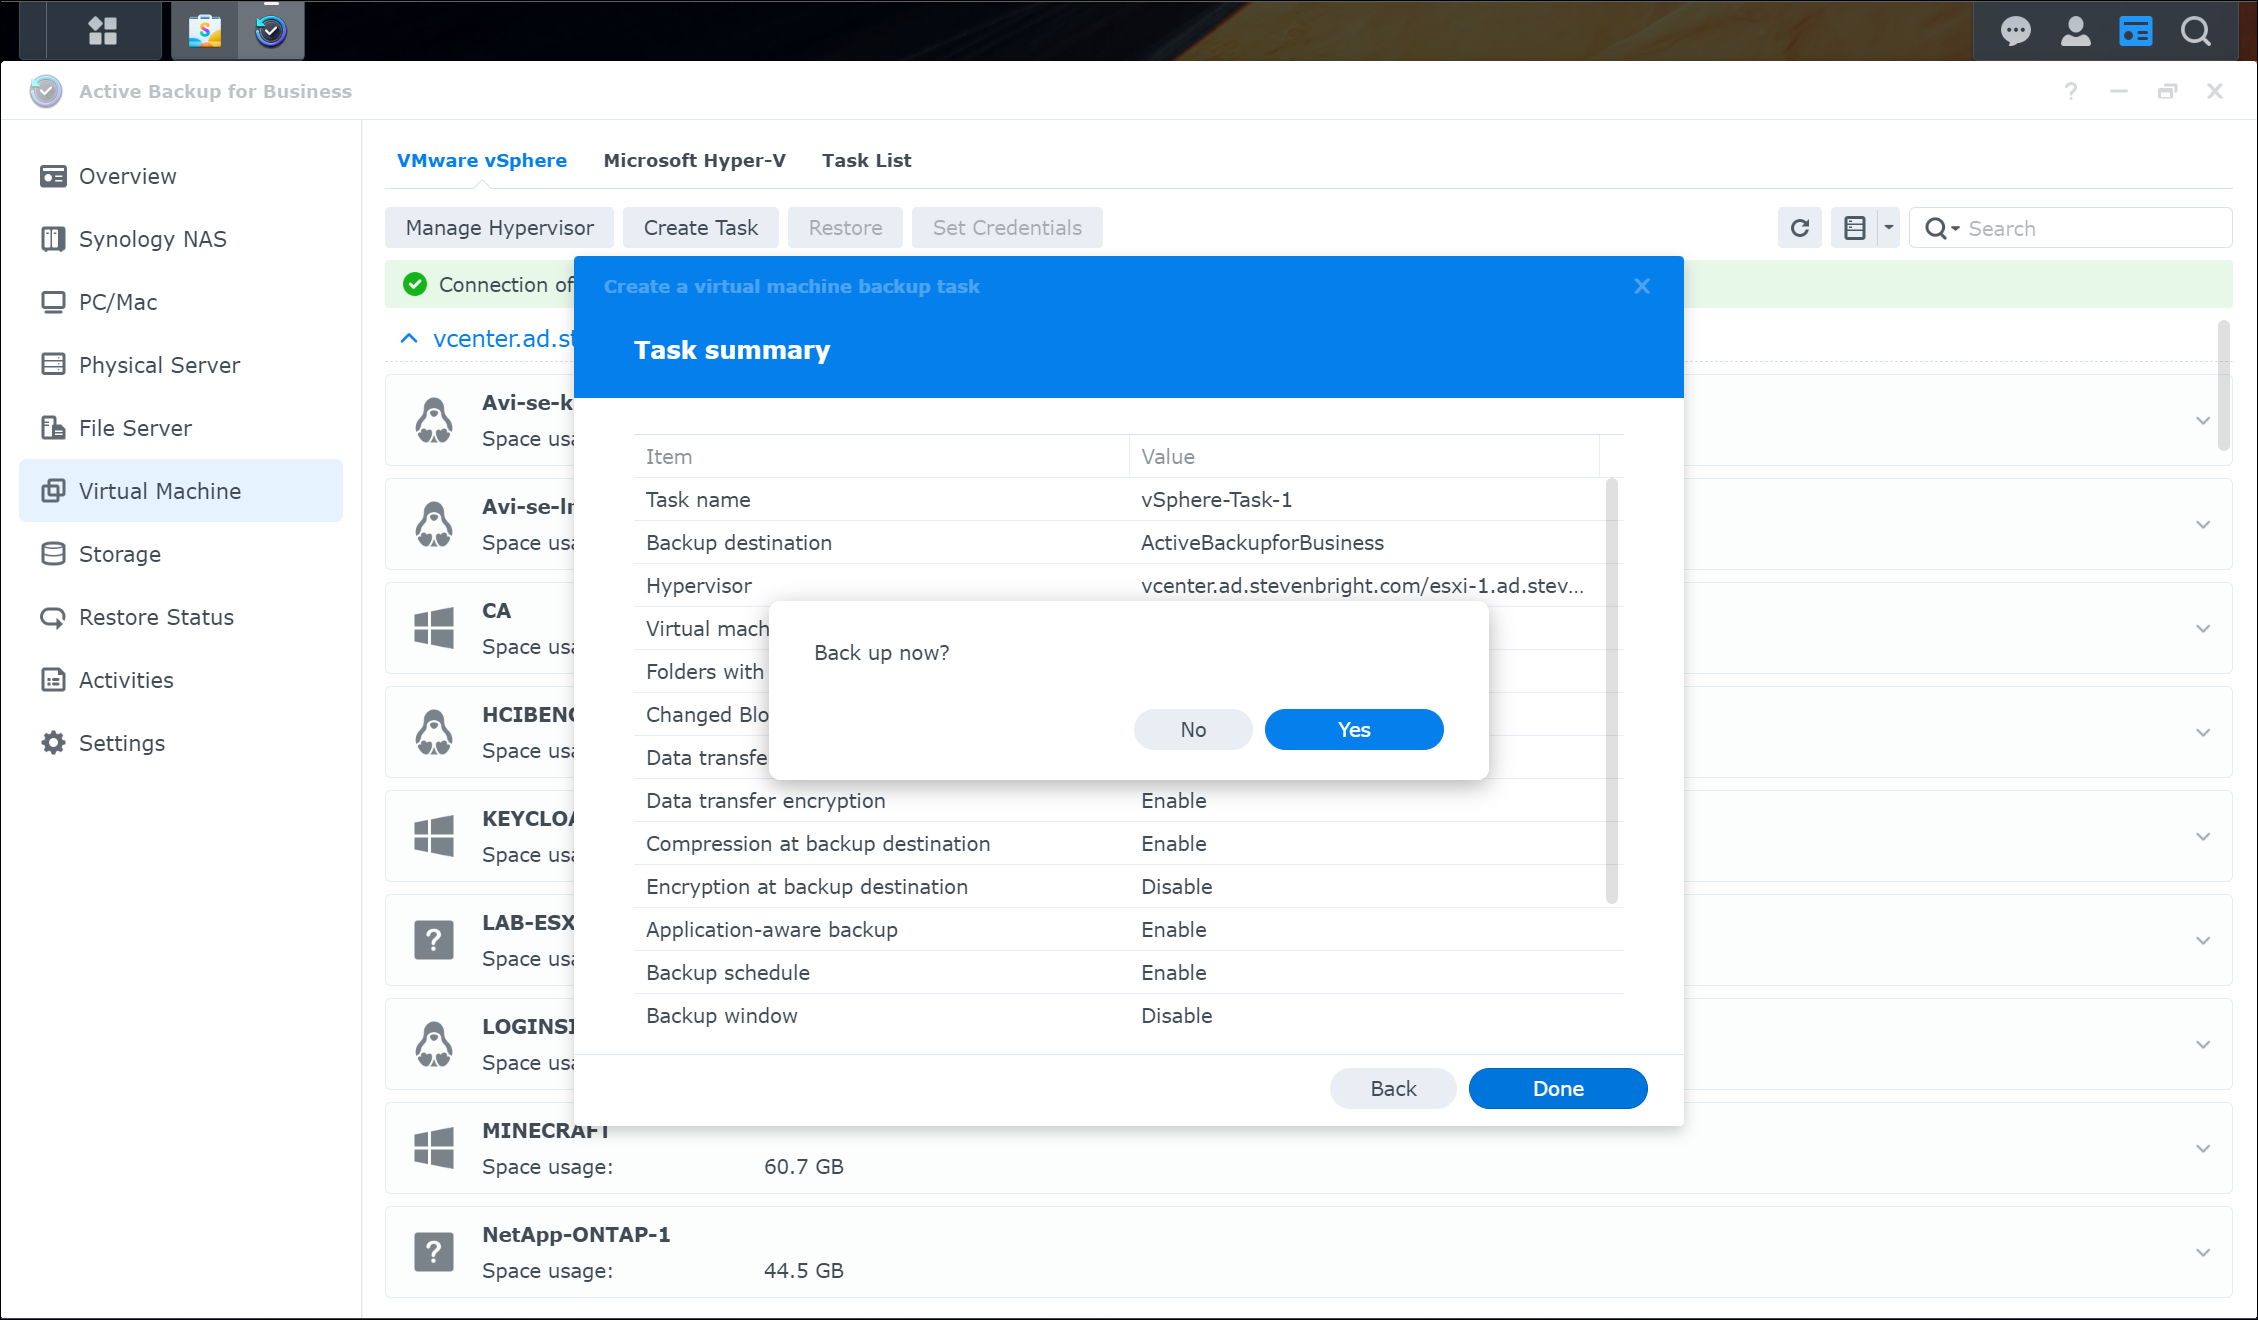 Screenshot of Synology Active Backup for Business Asking if Backup Should be Executed Now